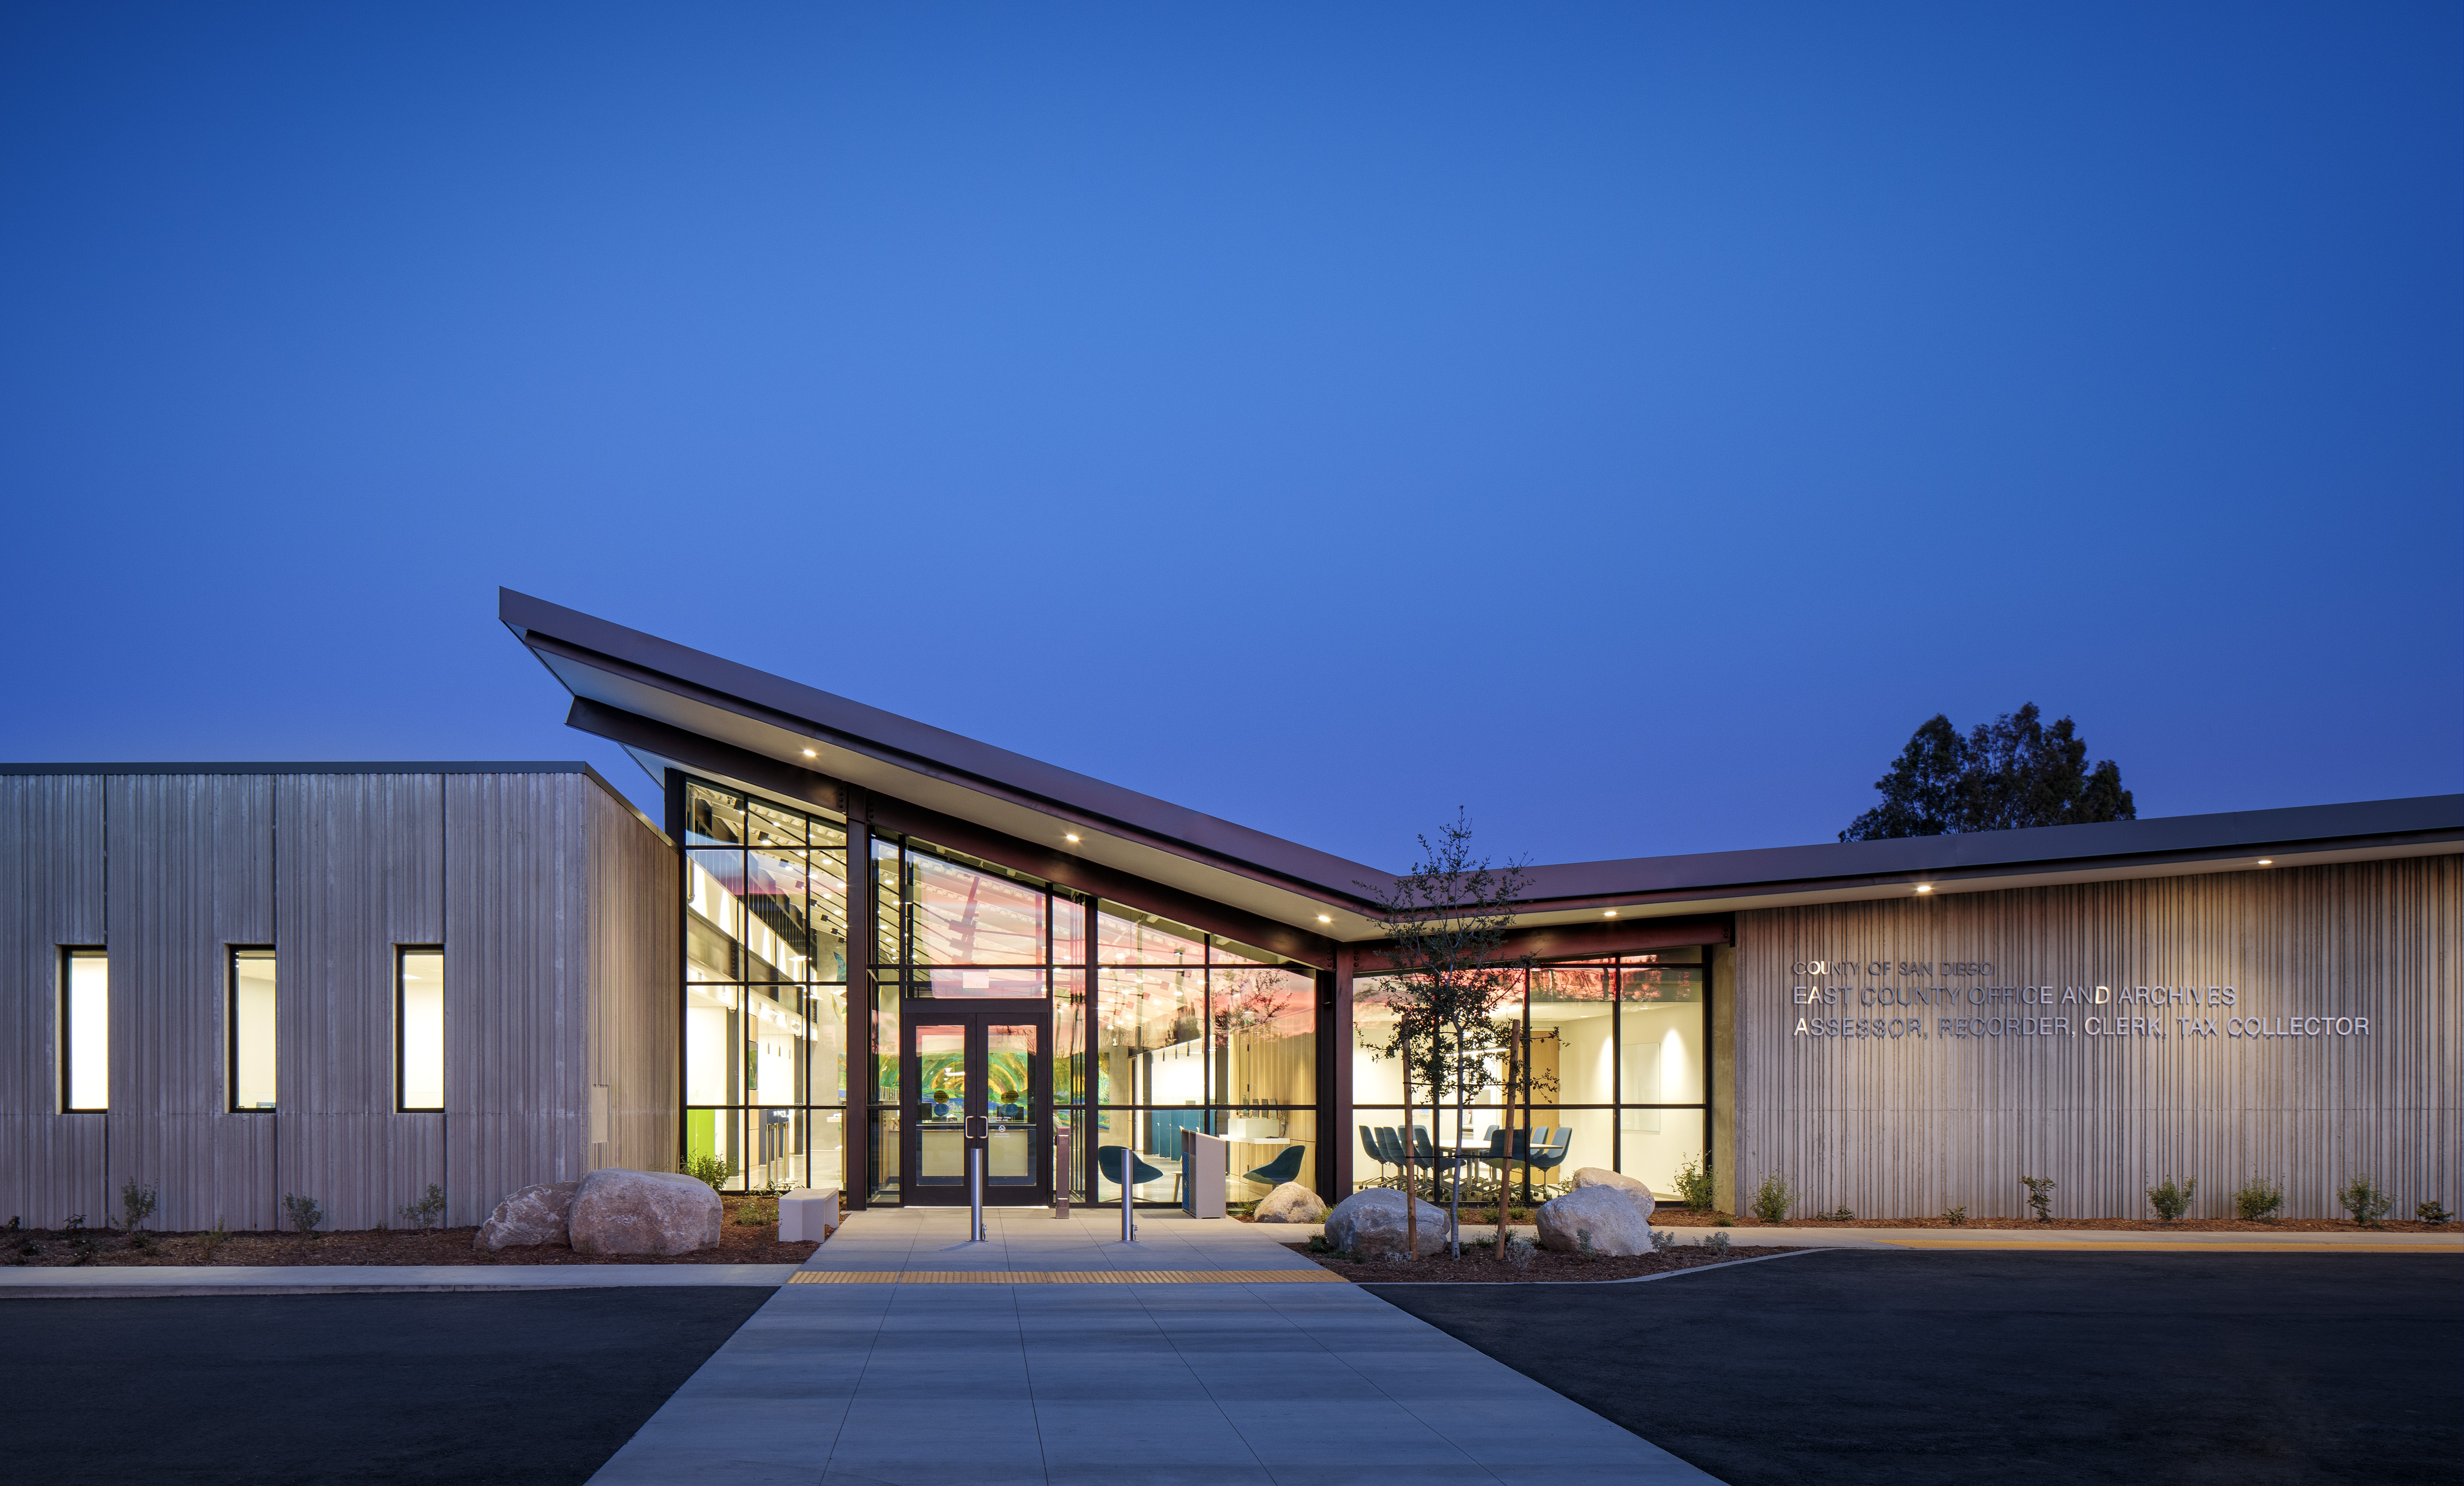 The single-story, 25,000-square-foot building meets LEED Gold certification standards and aligns with the county’s long-term energy goals. (Photos courtesy of San Diego County)